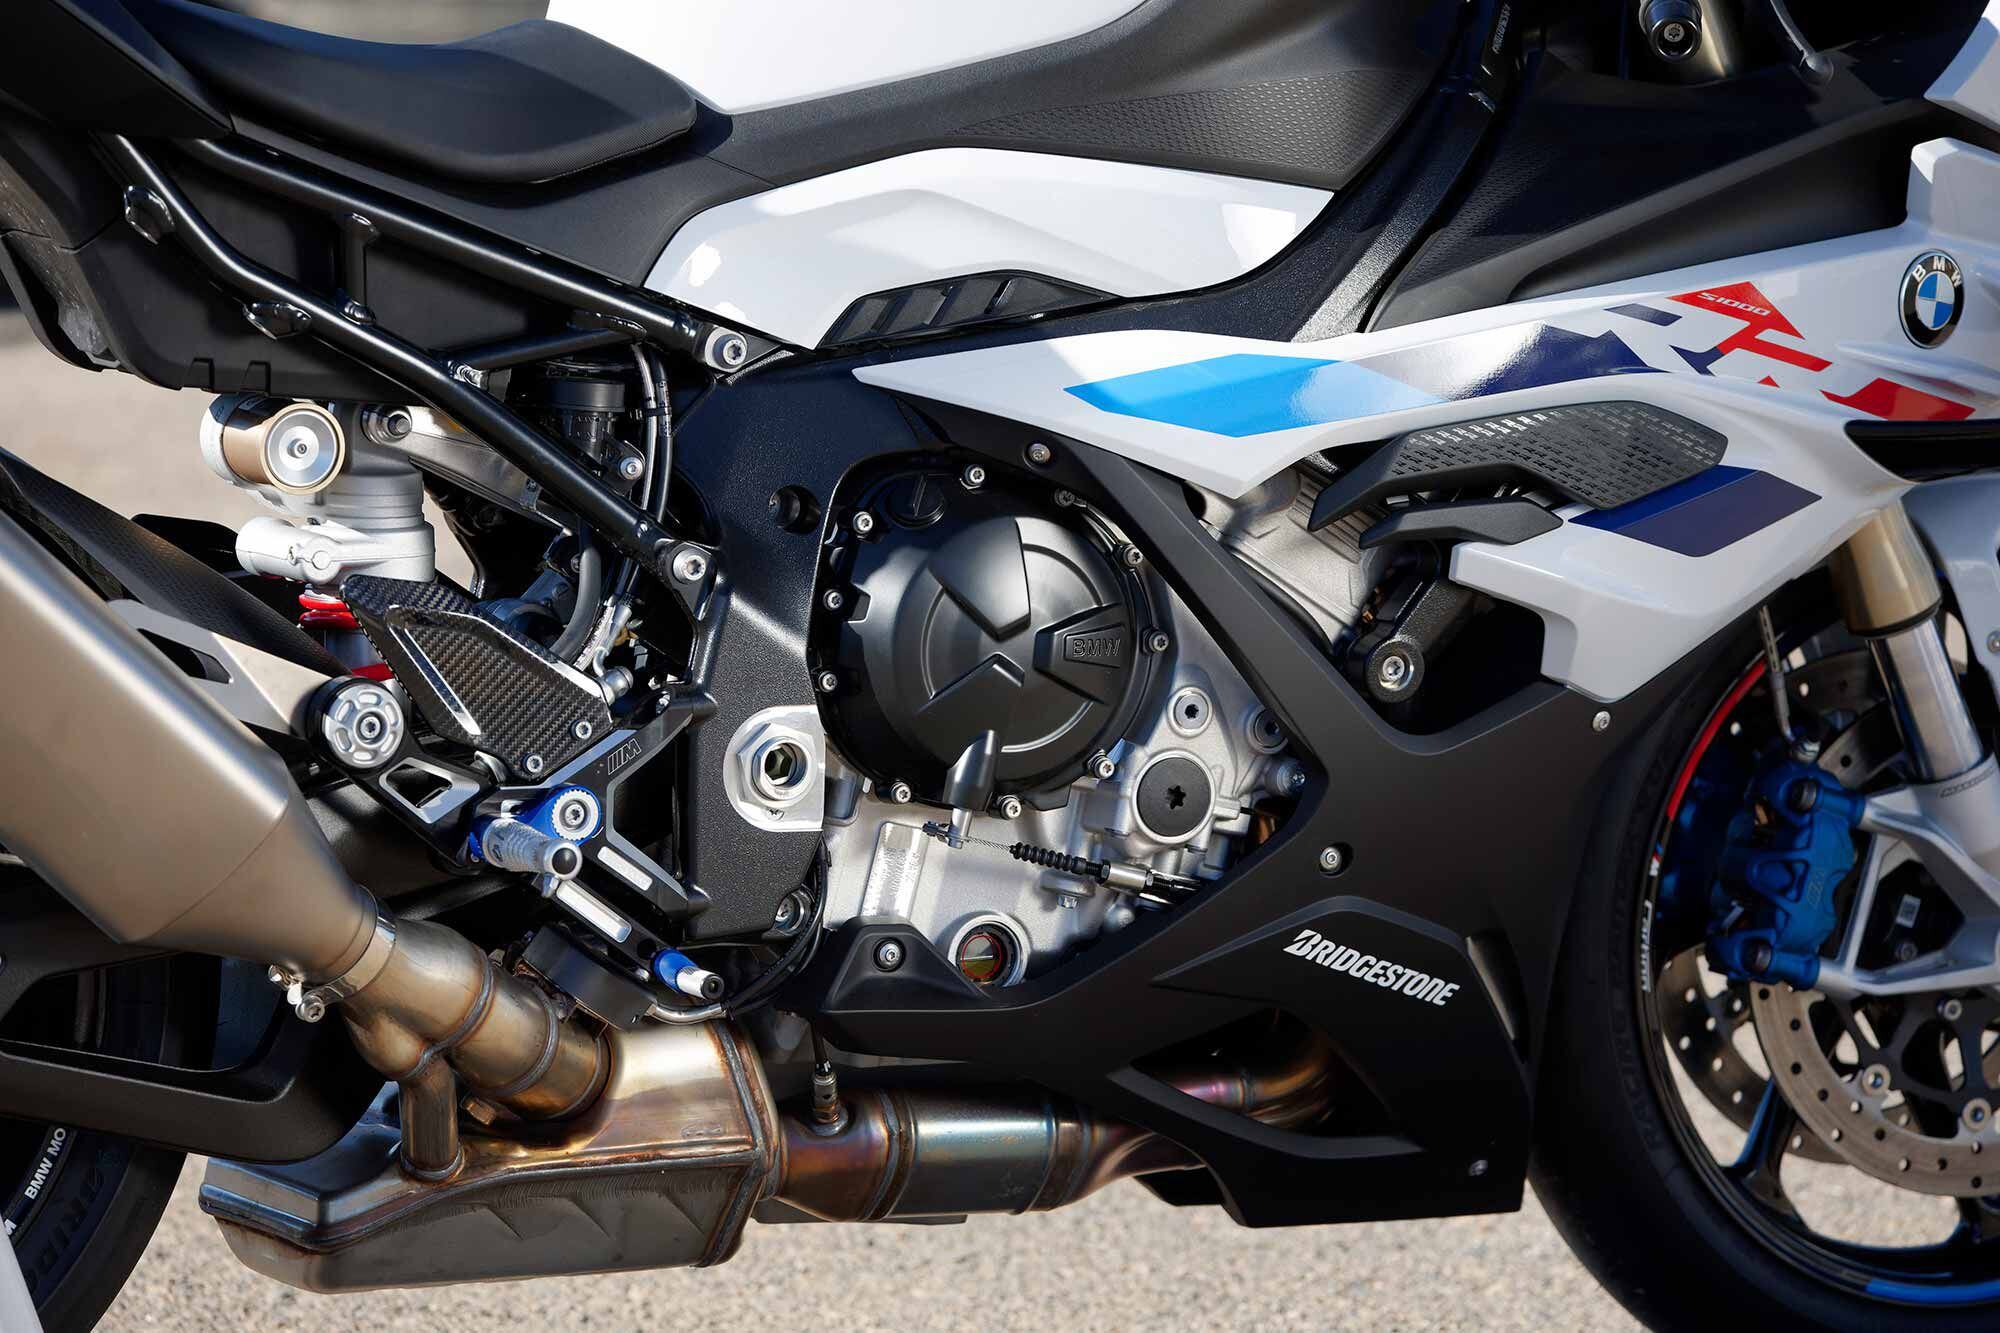 The S 1000 RR’s engine is a stressed member of the chassis and sits in the frame tilted 32 degrees forward.